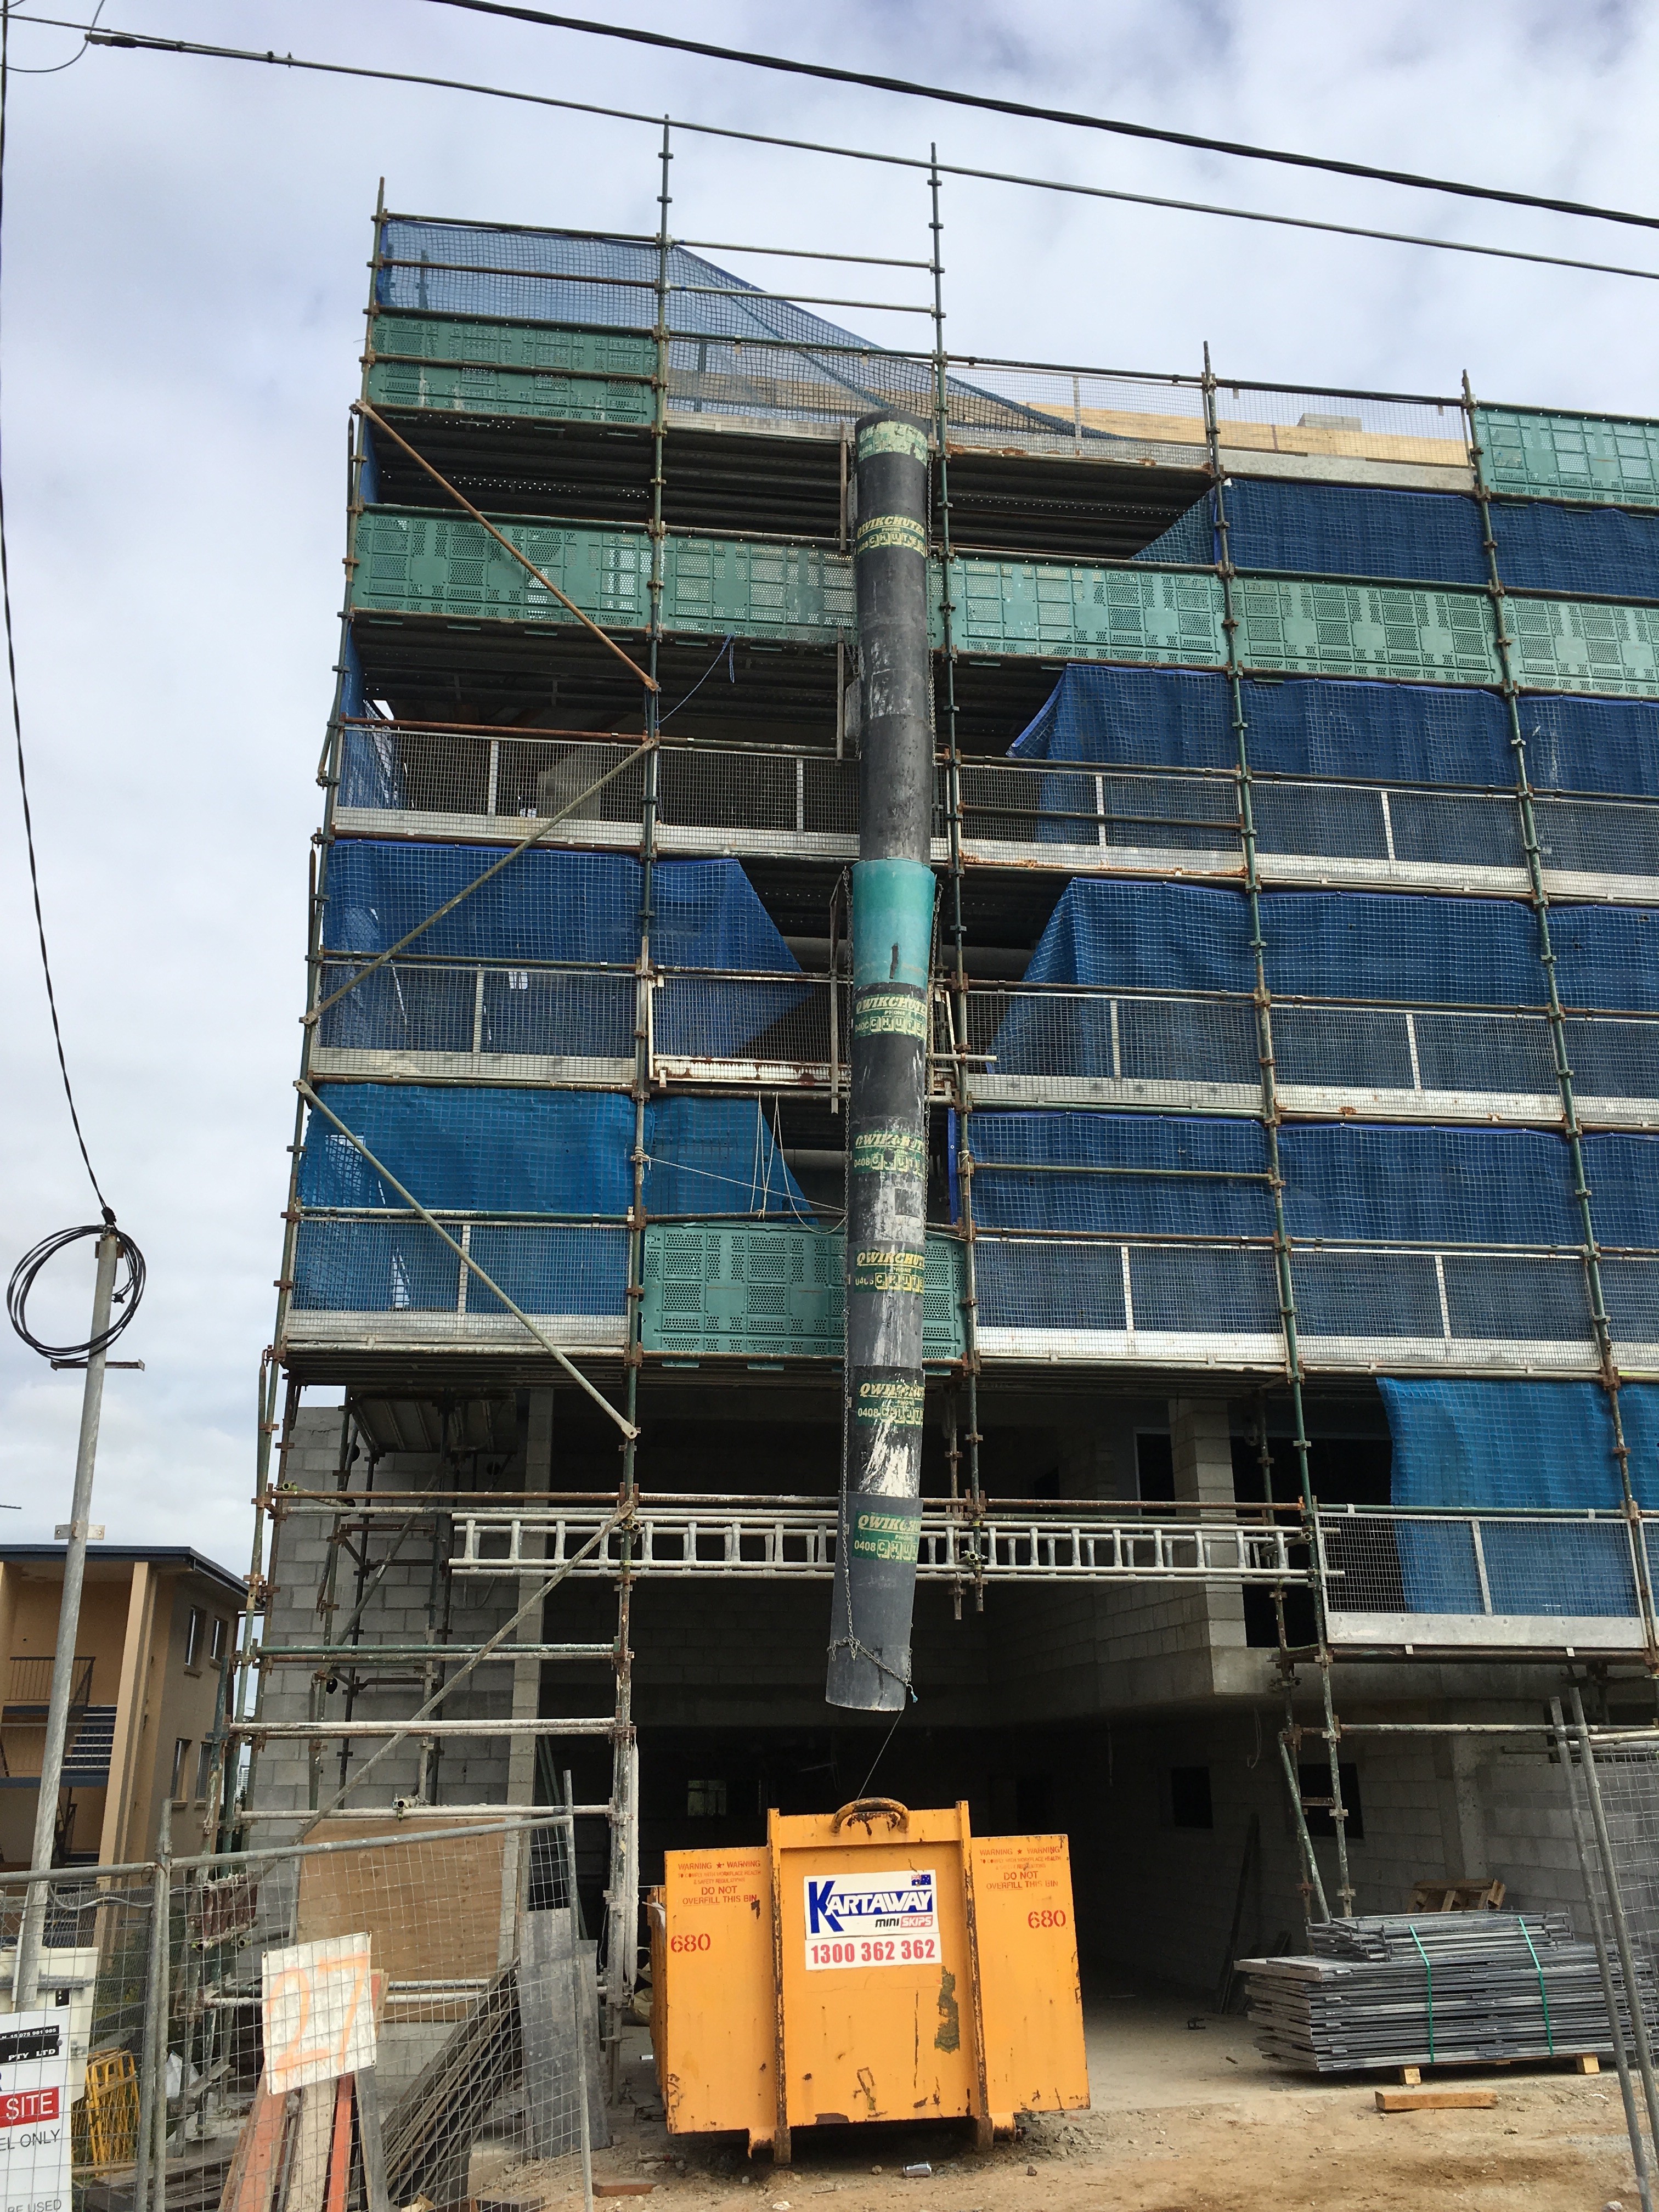 21 Lutwyche Apartments Construction update - balconies